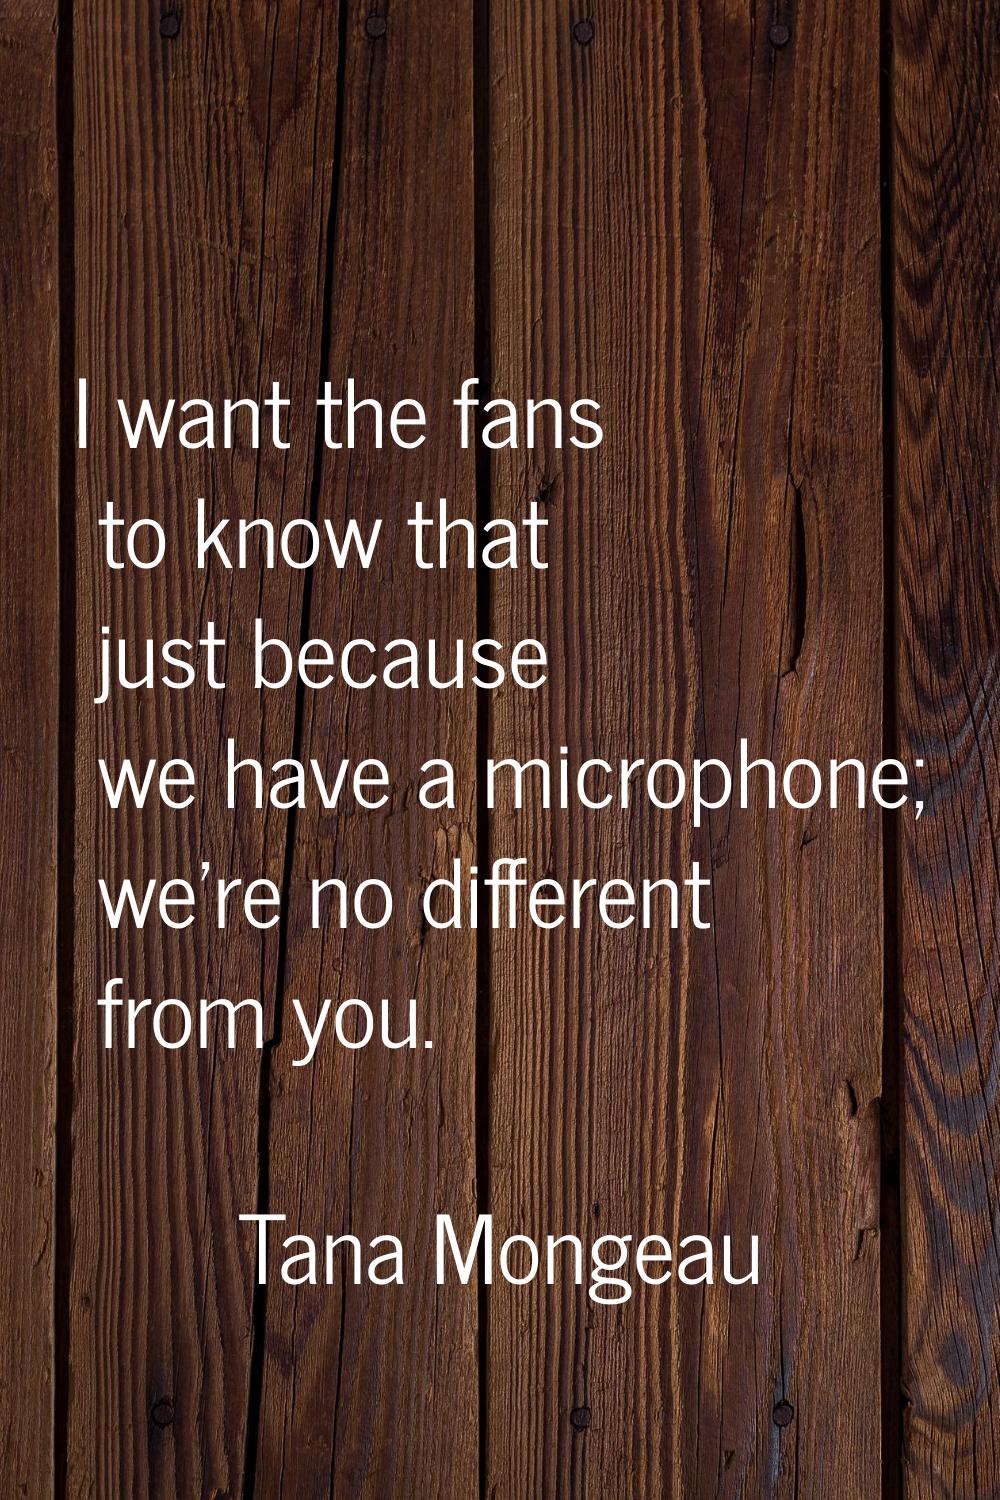 I want the fans to know that just because we have a microphone; we're no different from you.